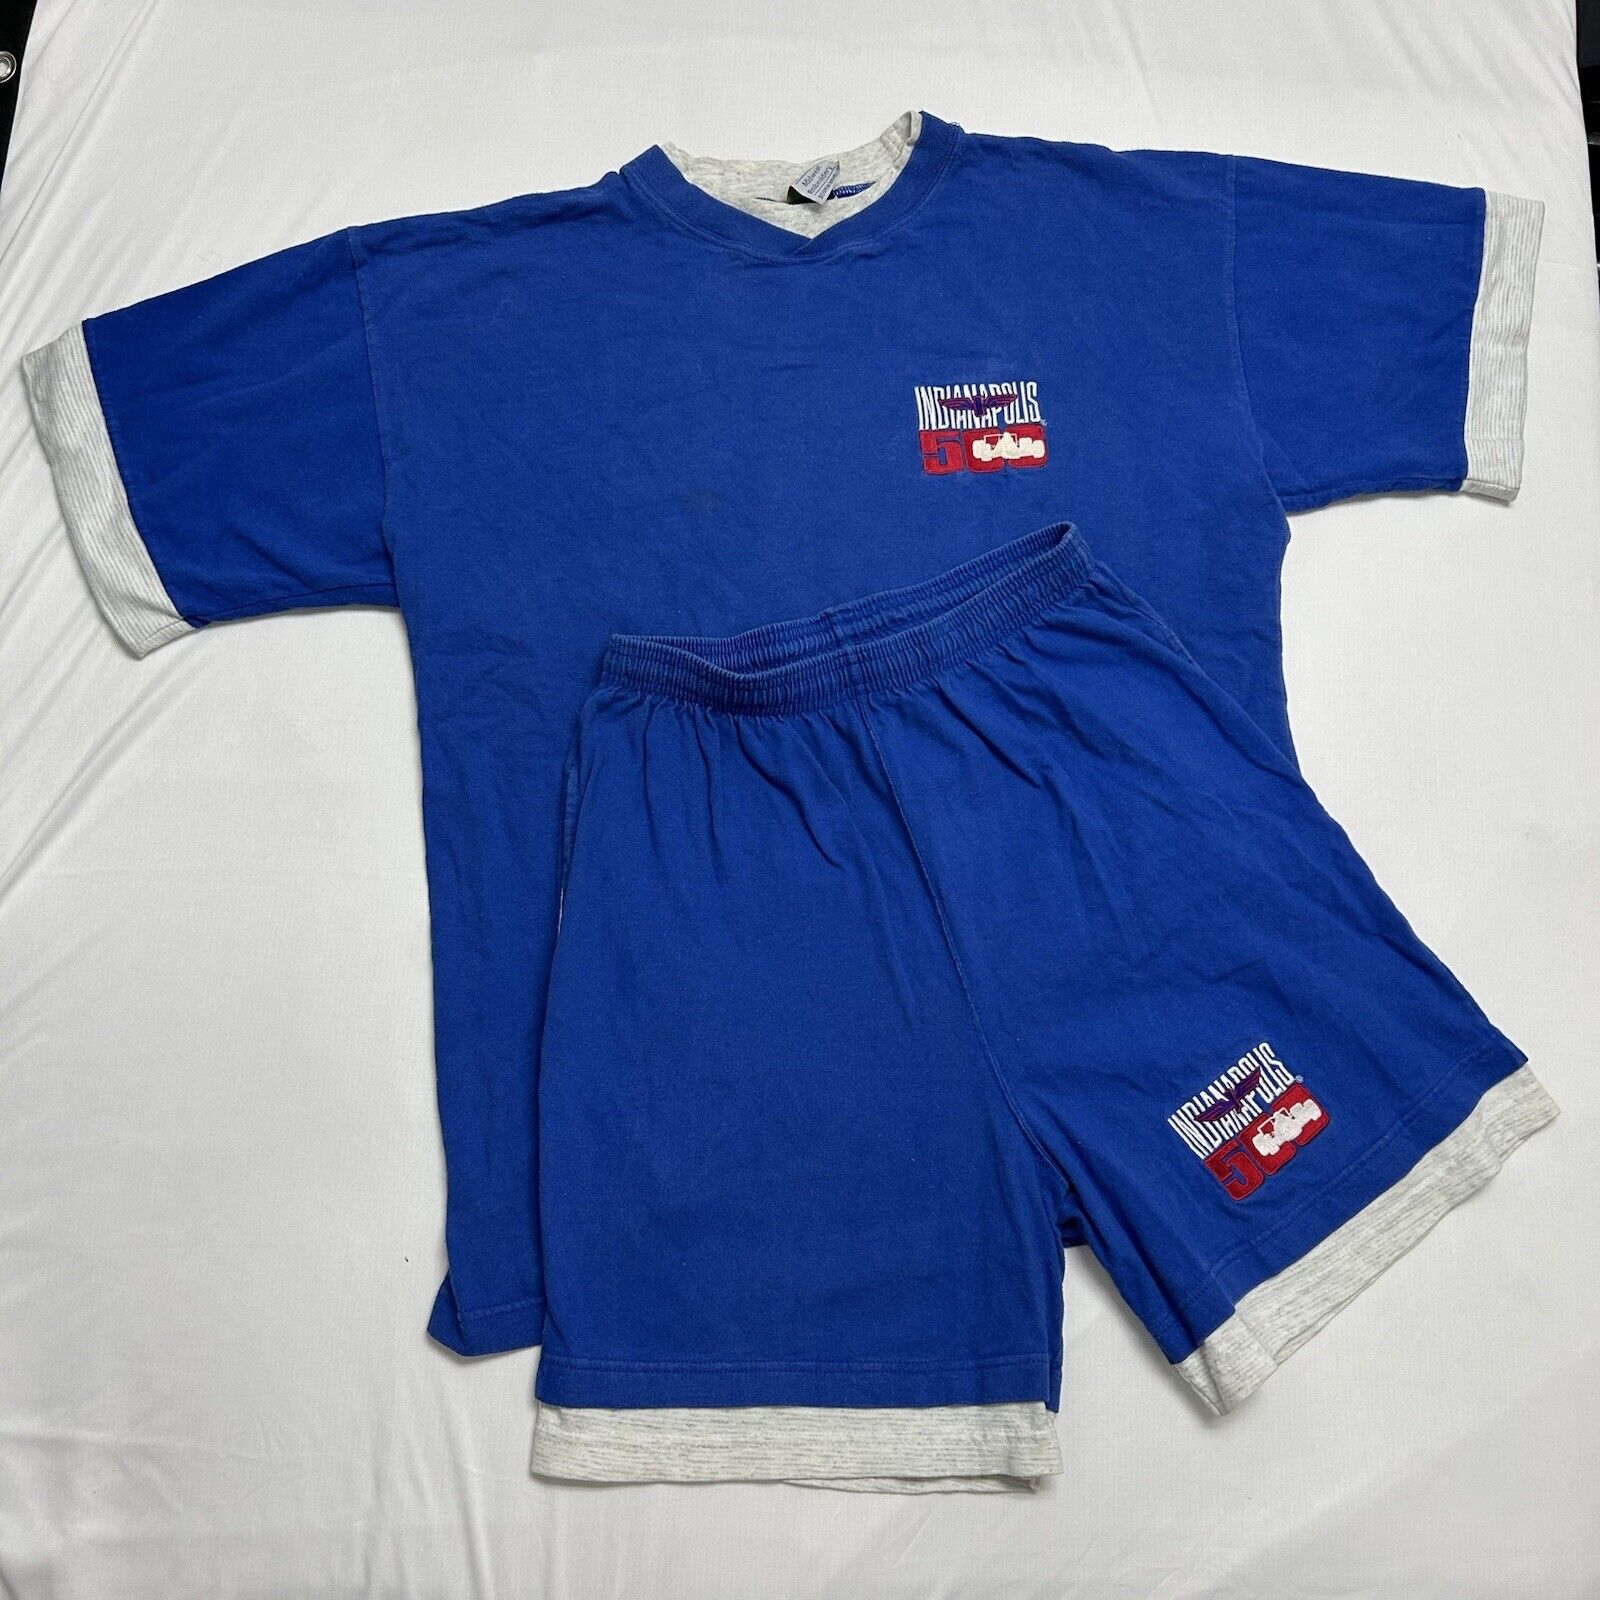 Vintage Midwest Embroidery Indianapolis 500 Matching Blue Shirt And Shorts SET L